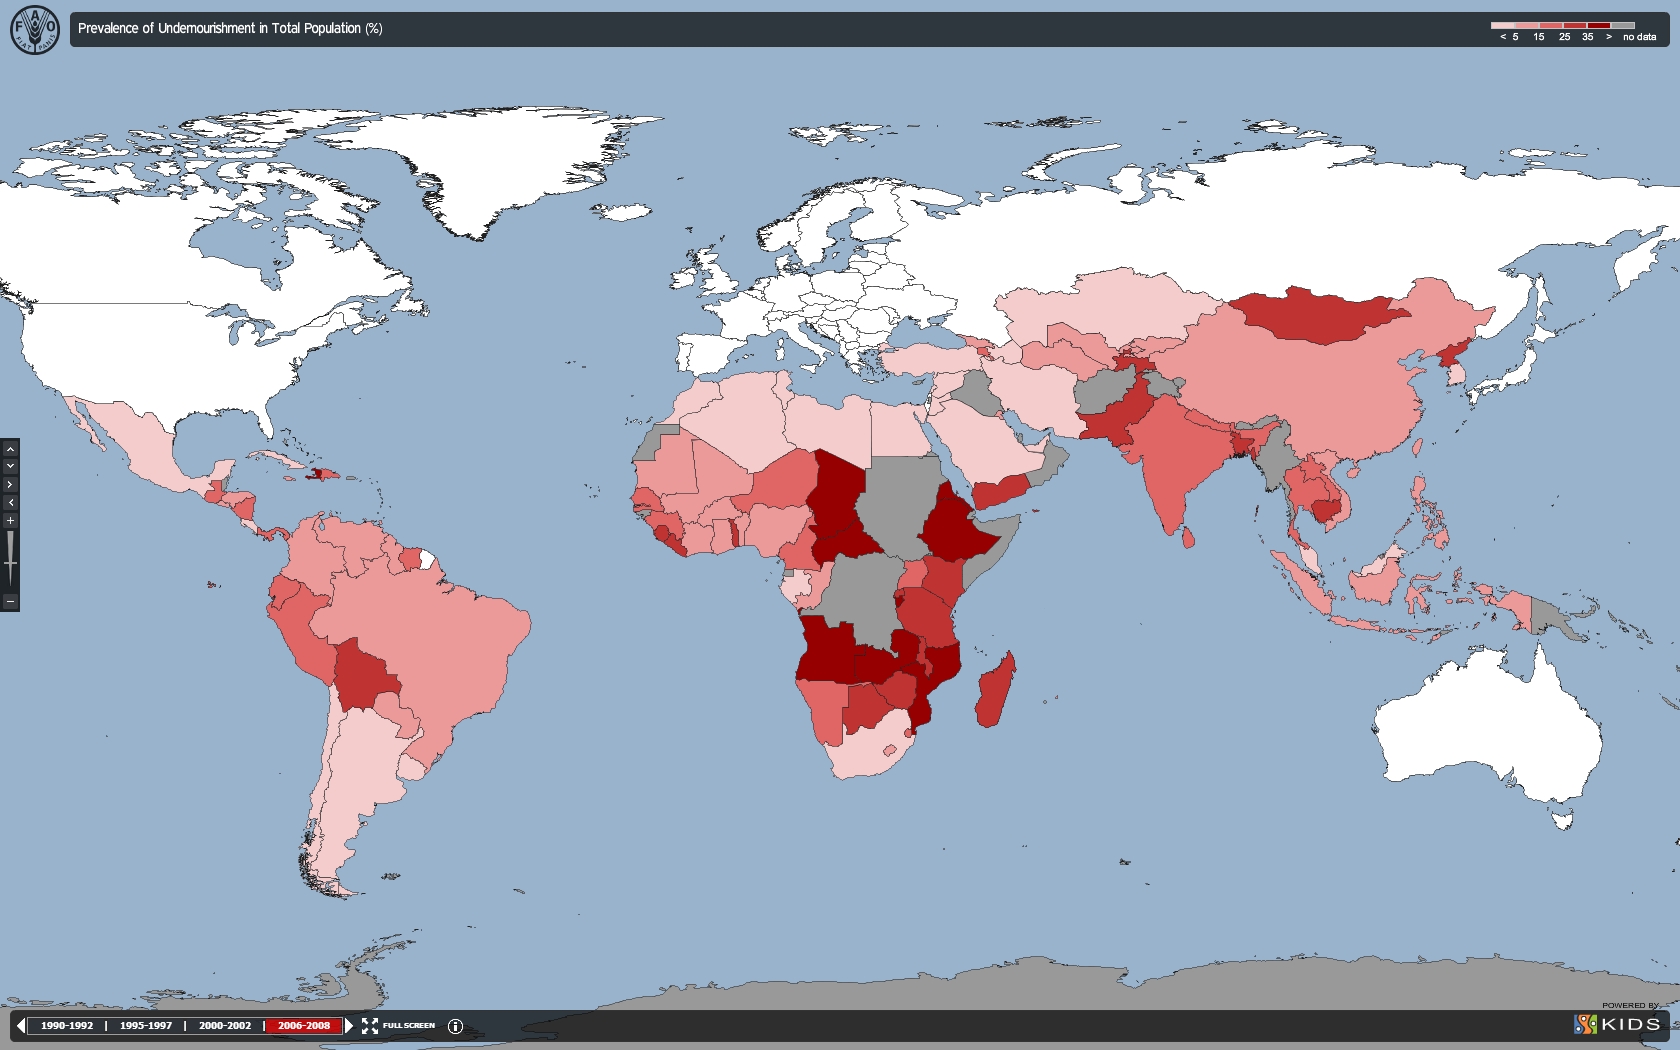 Enlarged view: Prevalence of undernourishment in total population (%), FAO